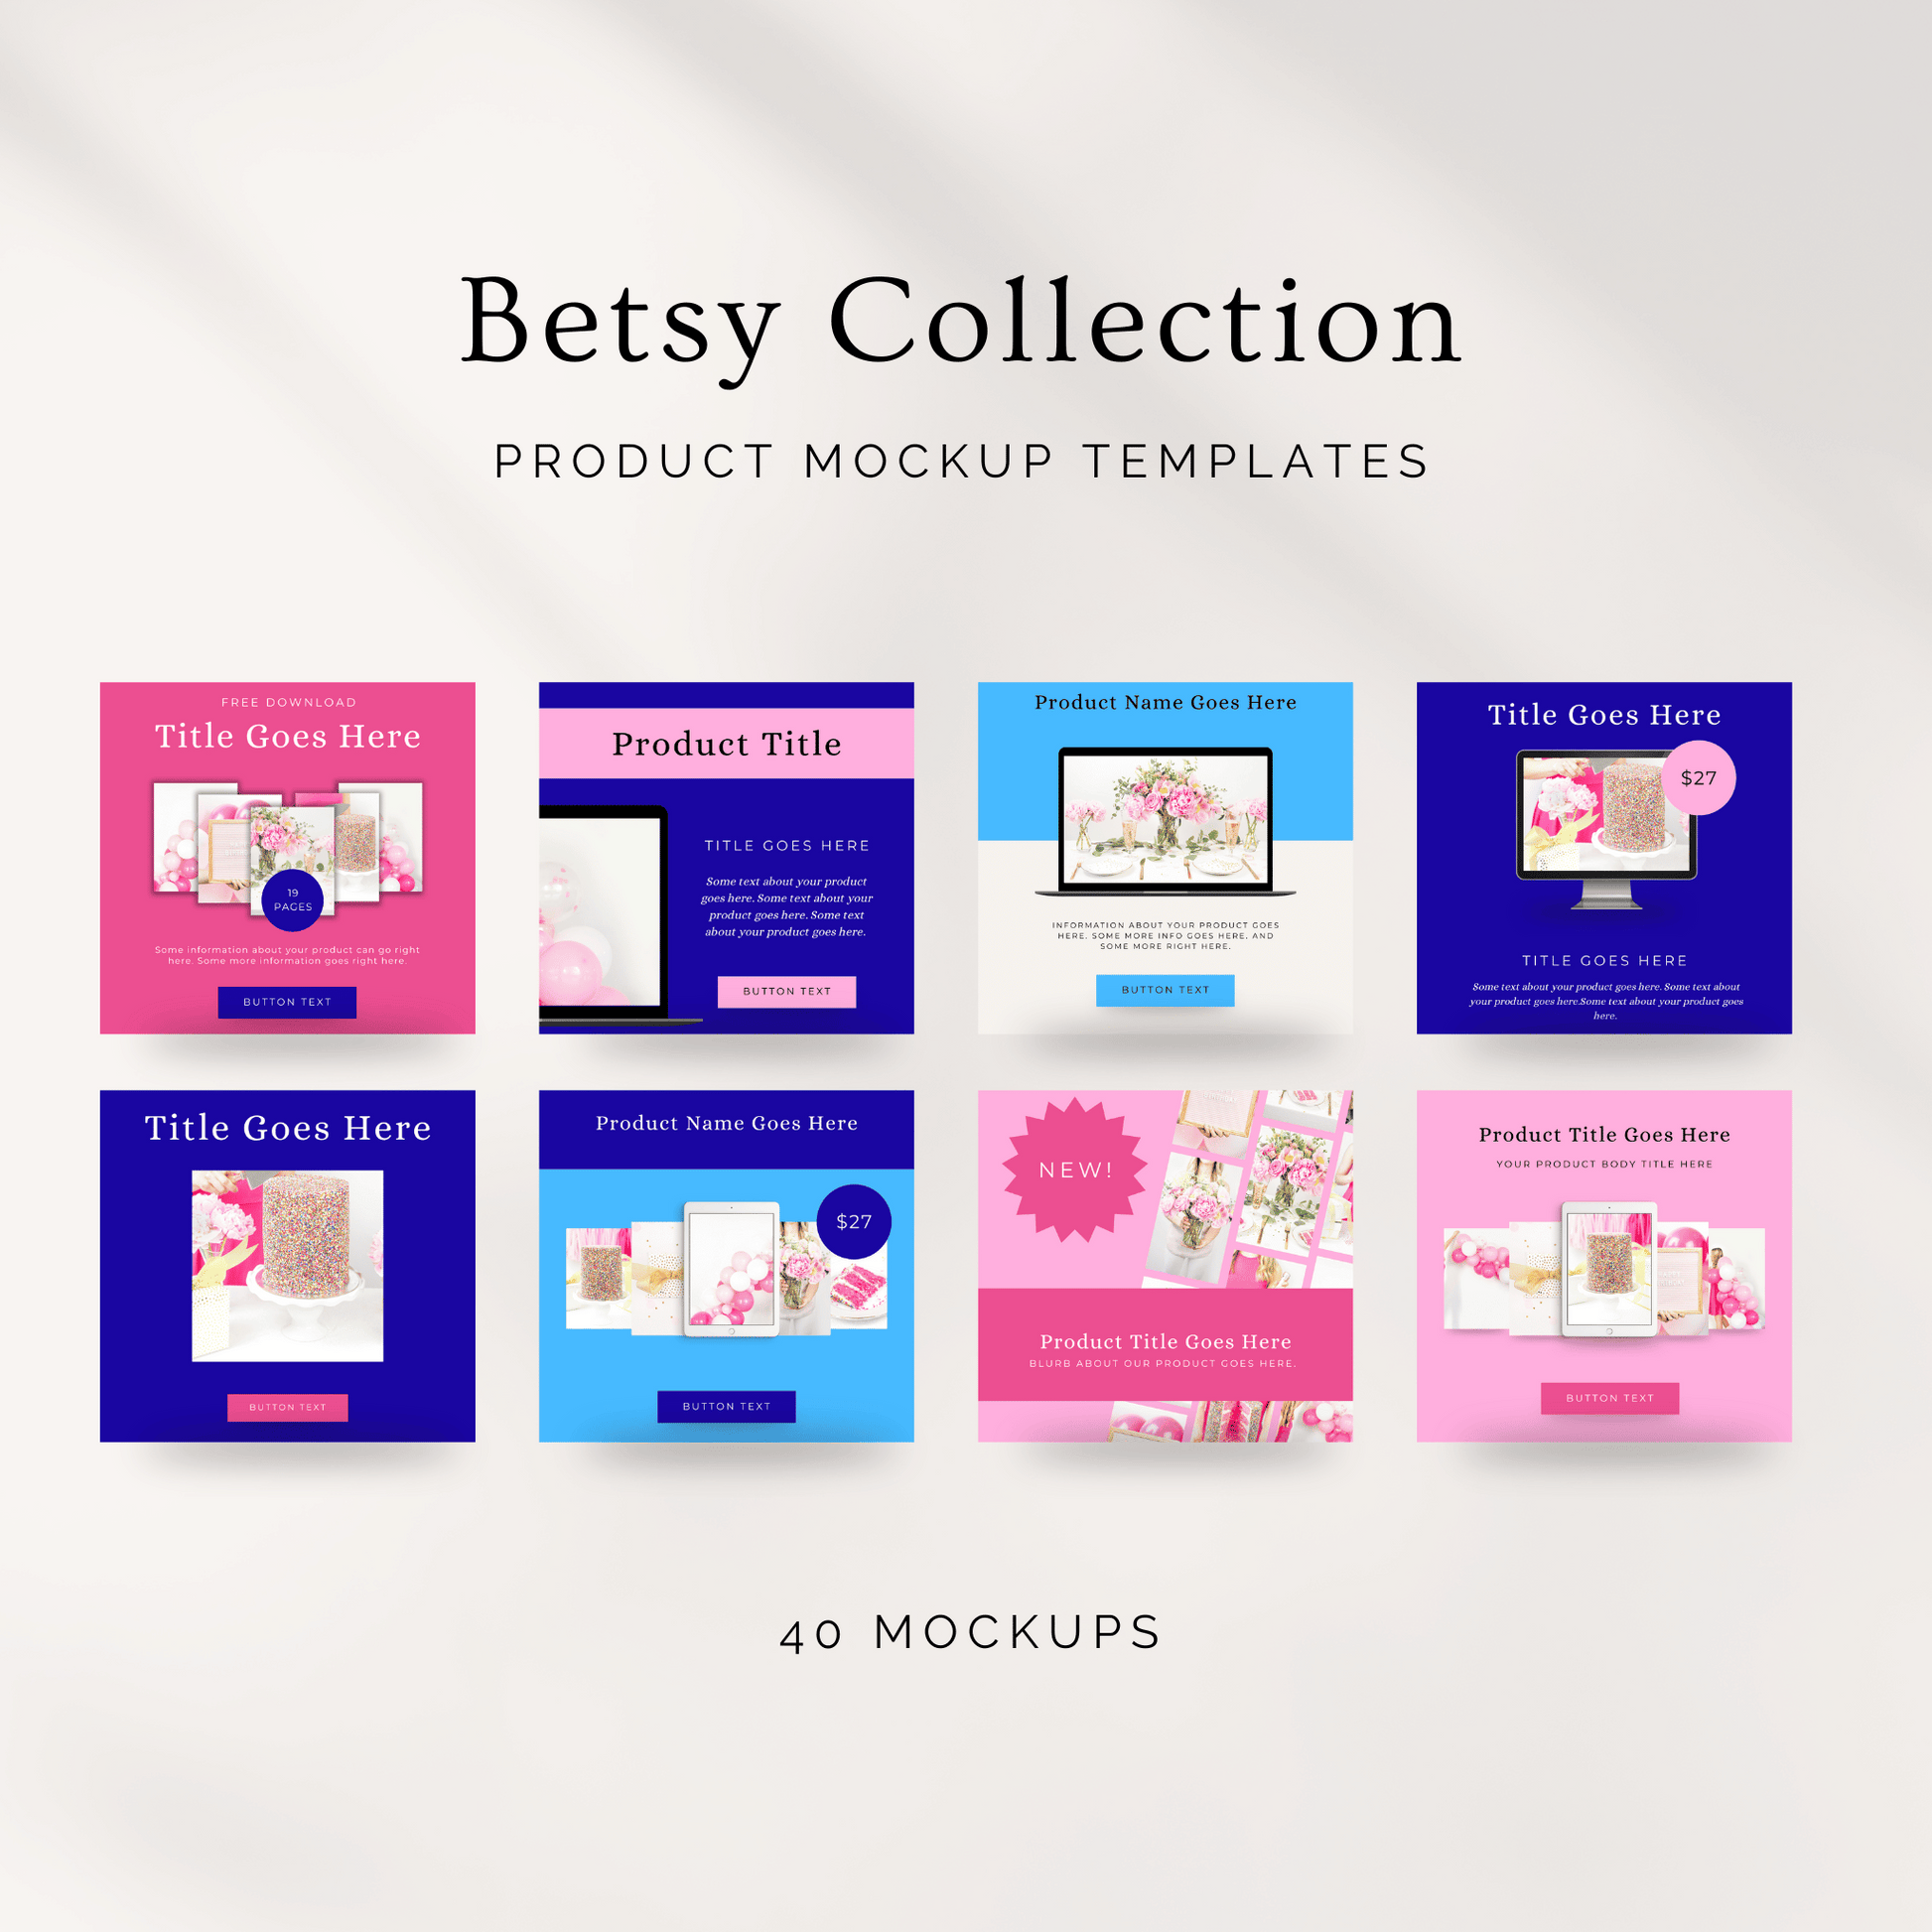 Betsy collection of Canva templates is a colorful, cold and striking theme for you to use. This Canva template bundle includes Canva ebook, Canva workbook, Canva Product Mockups and Canva Presentation Slide Deck.